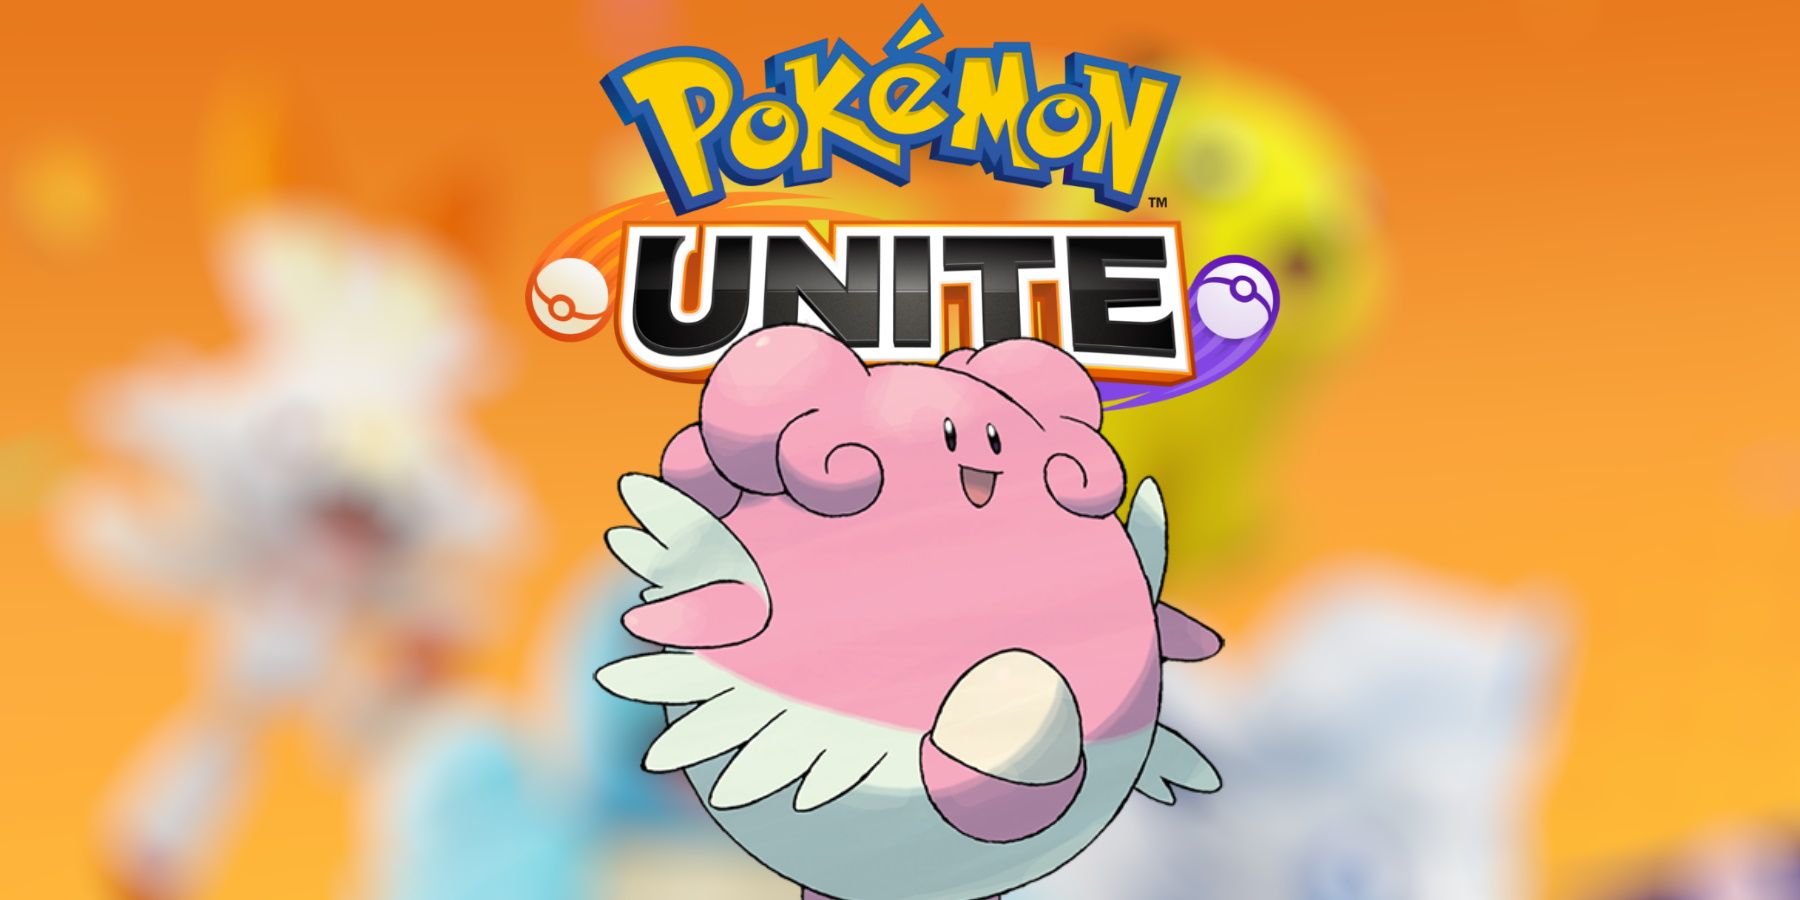 pokemon unite blissey anime on blurred background and official logo